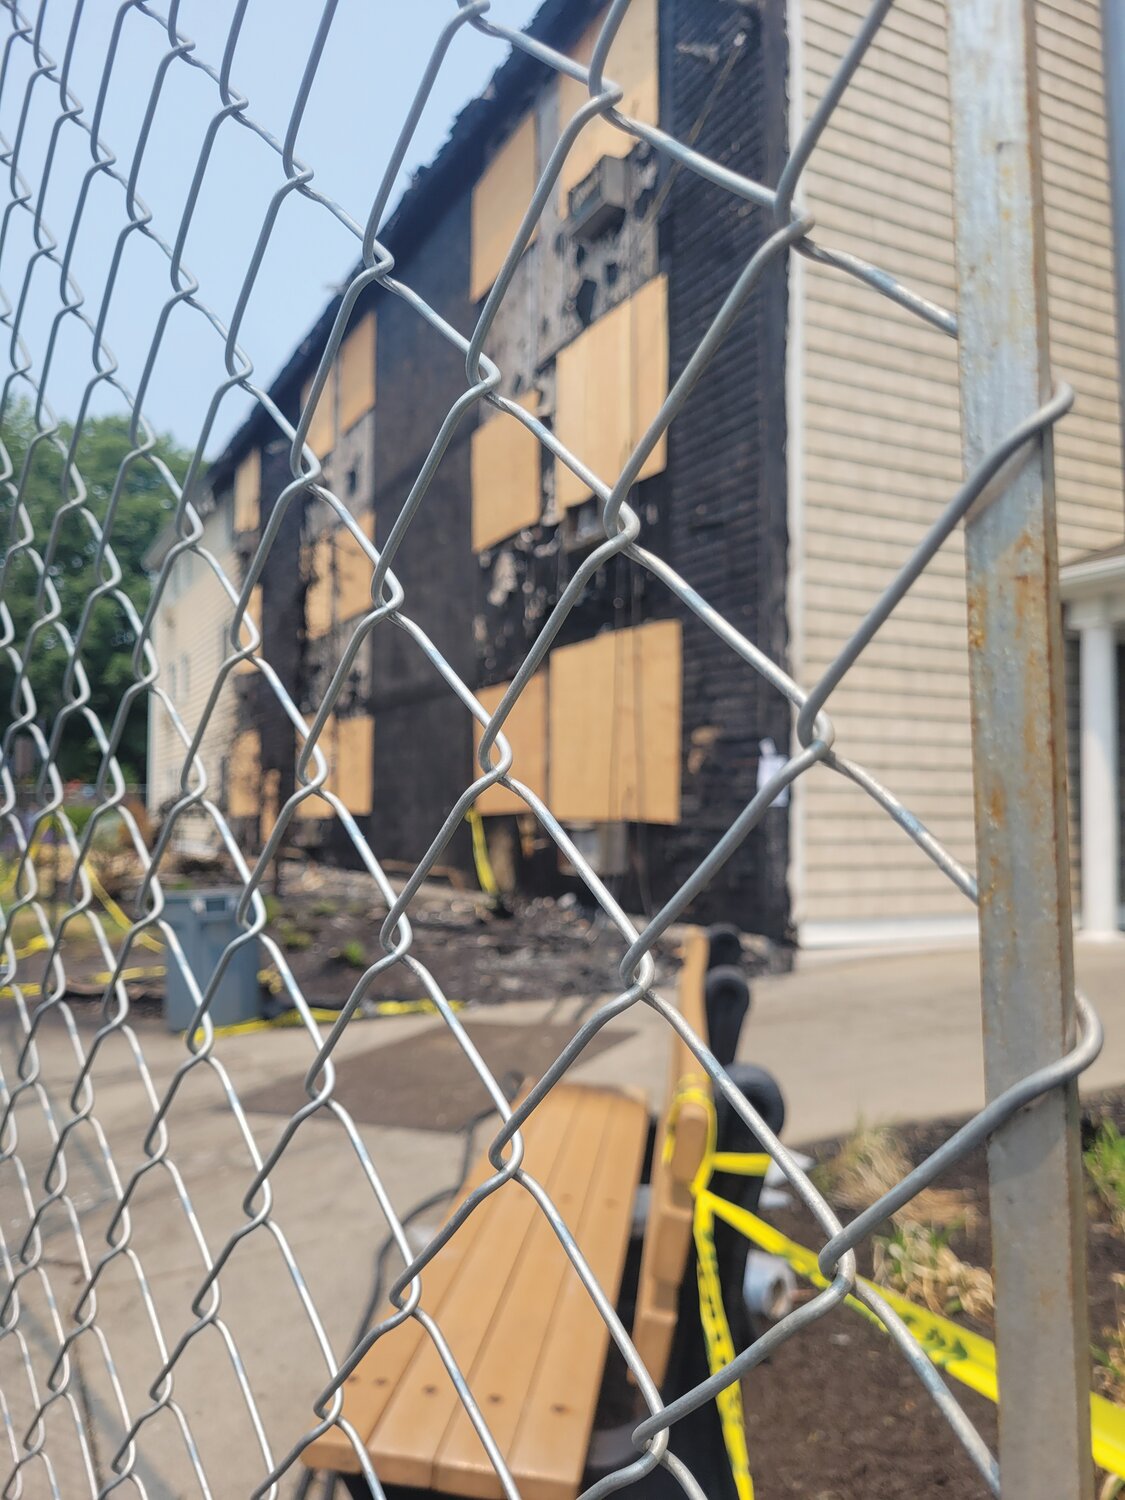 BURNED OUT: The building property manager says it may be as long as 6 to 12 months until Simmons Village apartment tenants are allowed to return to their homes. She said that the 45-unit building, constructed in 1979, has to be completely gutted as a result of the fire that occurred on Sunday, May 28.